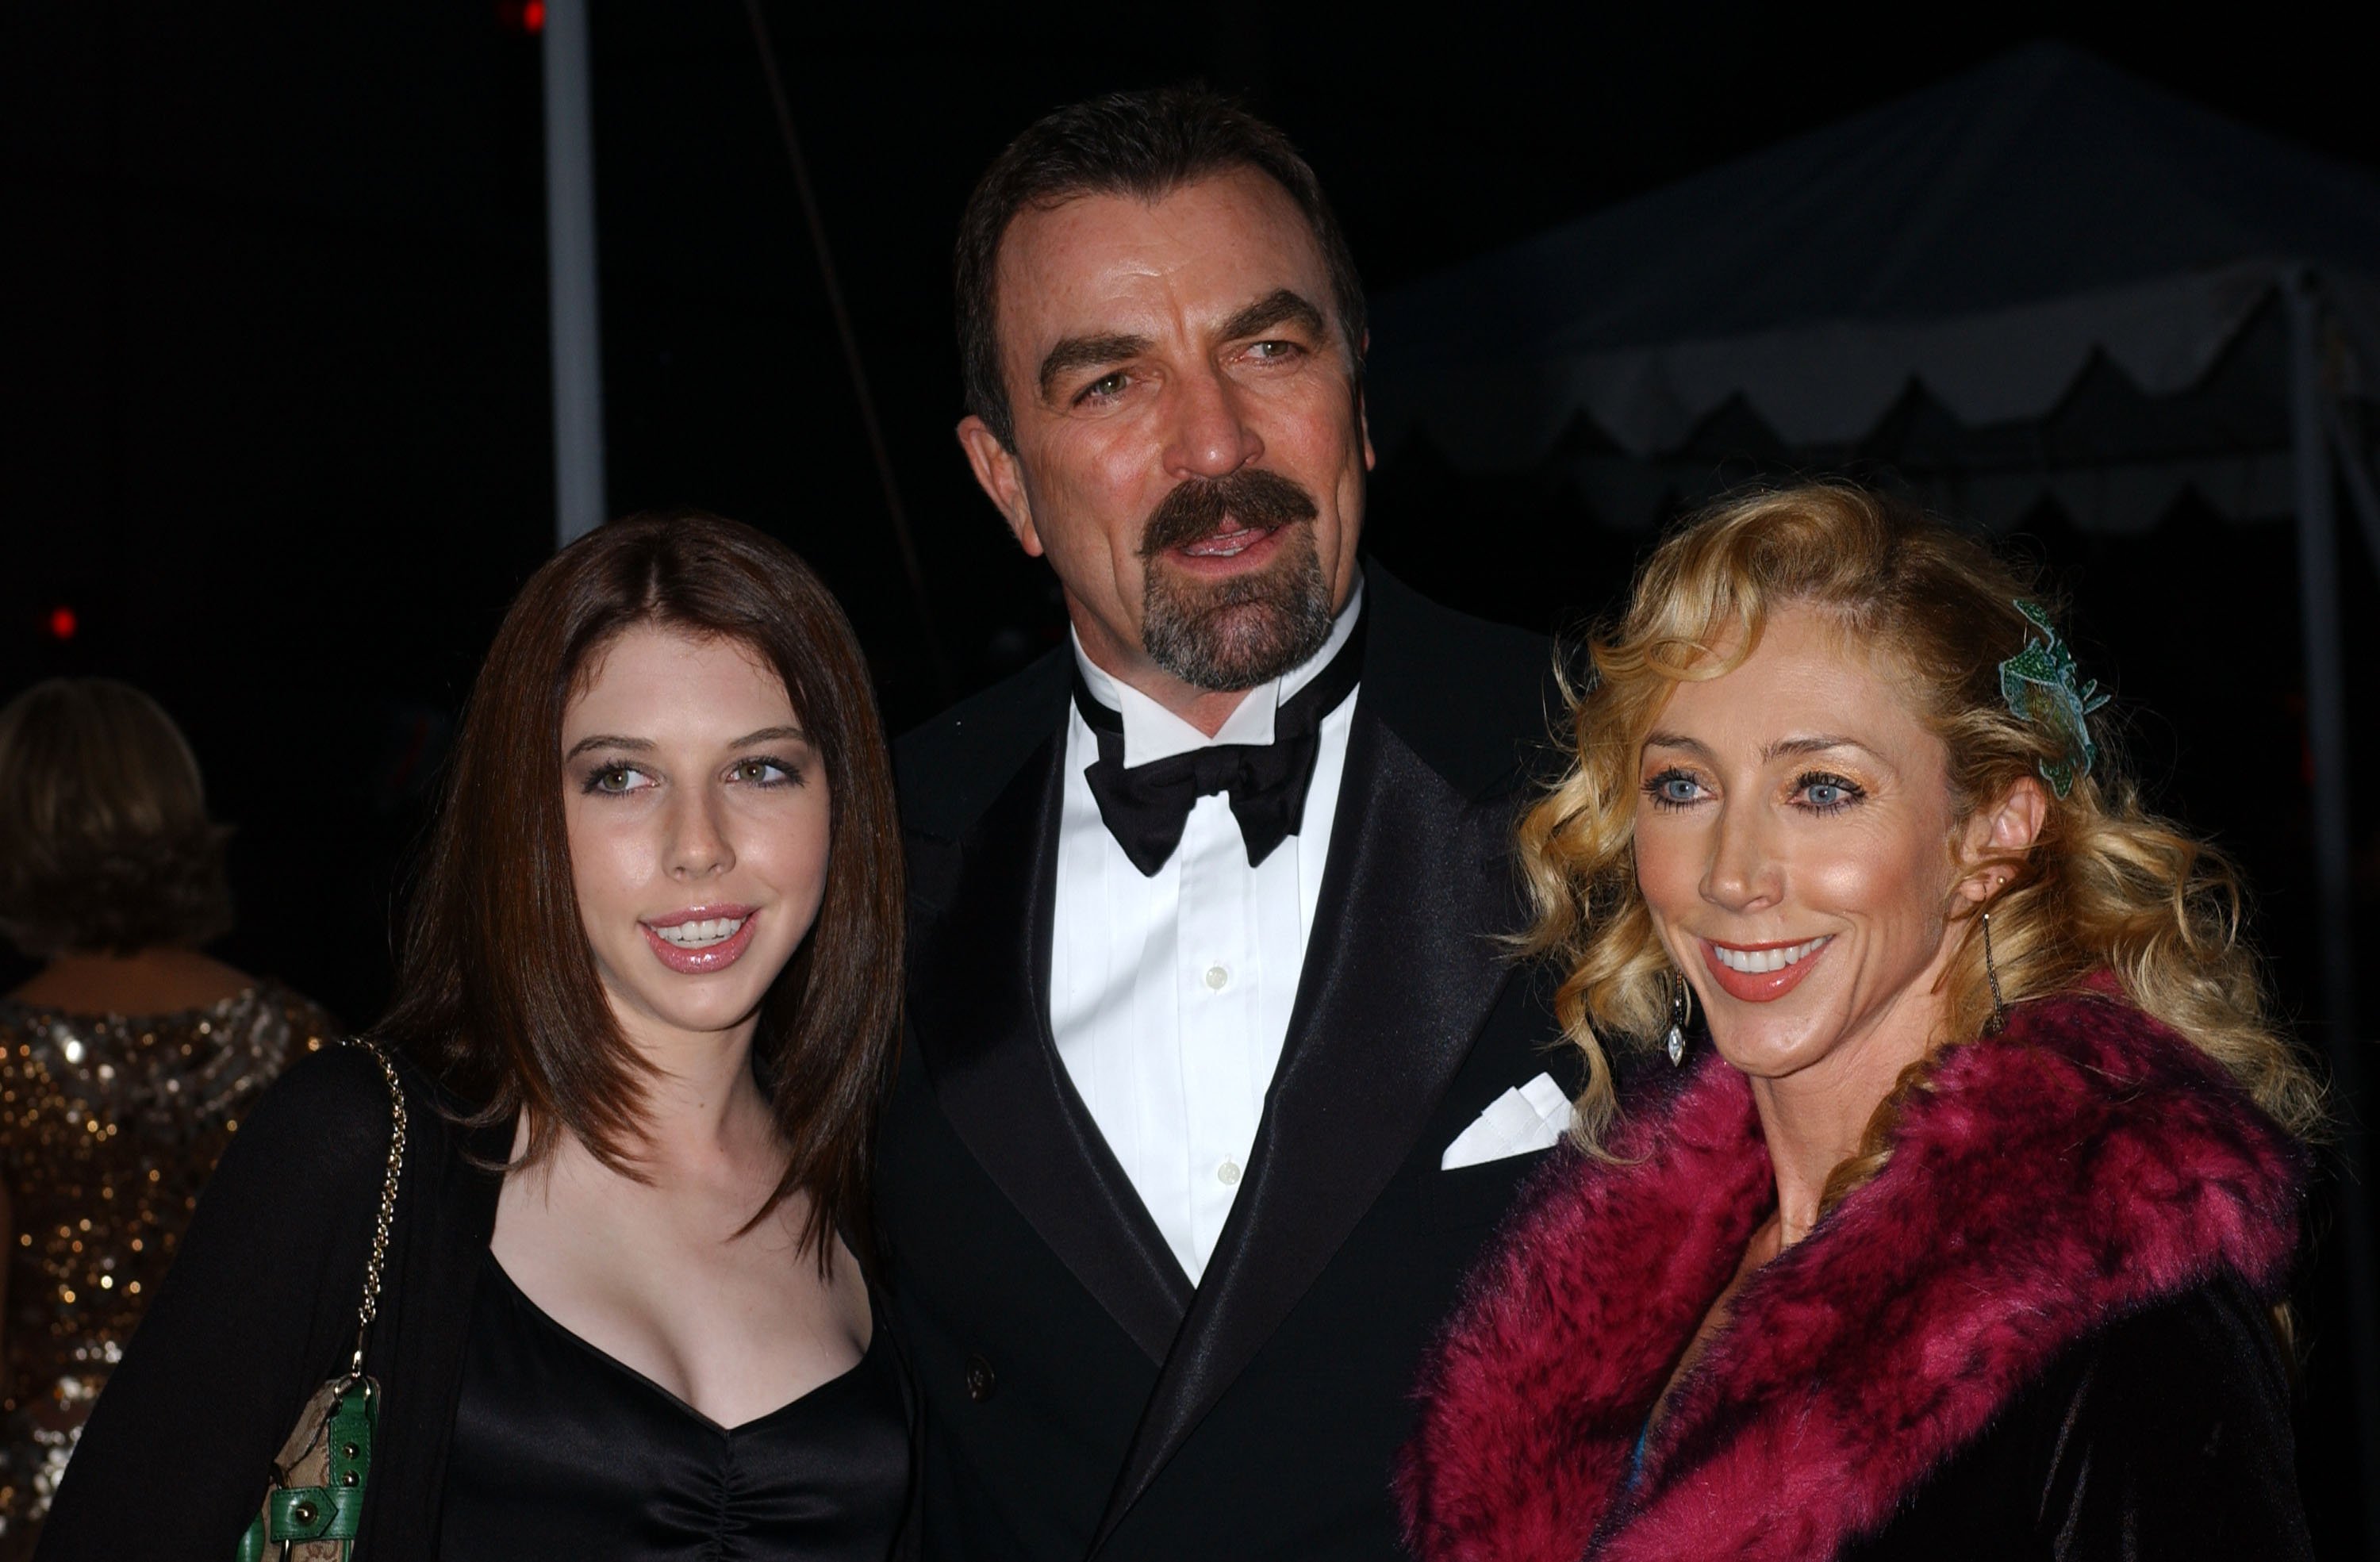 Tom Selleck, his wife Jillie Mack and their daughter Hannah at the People's Choice Awards in 2005. | Source: Getty Images